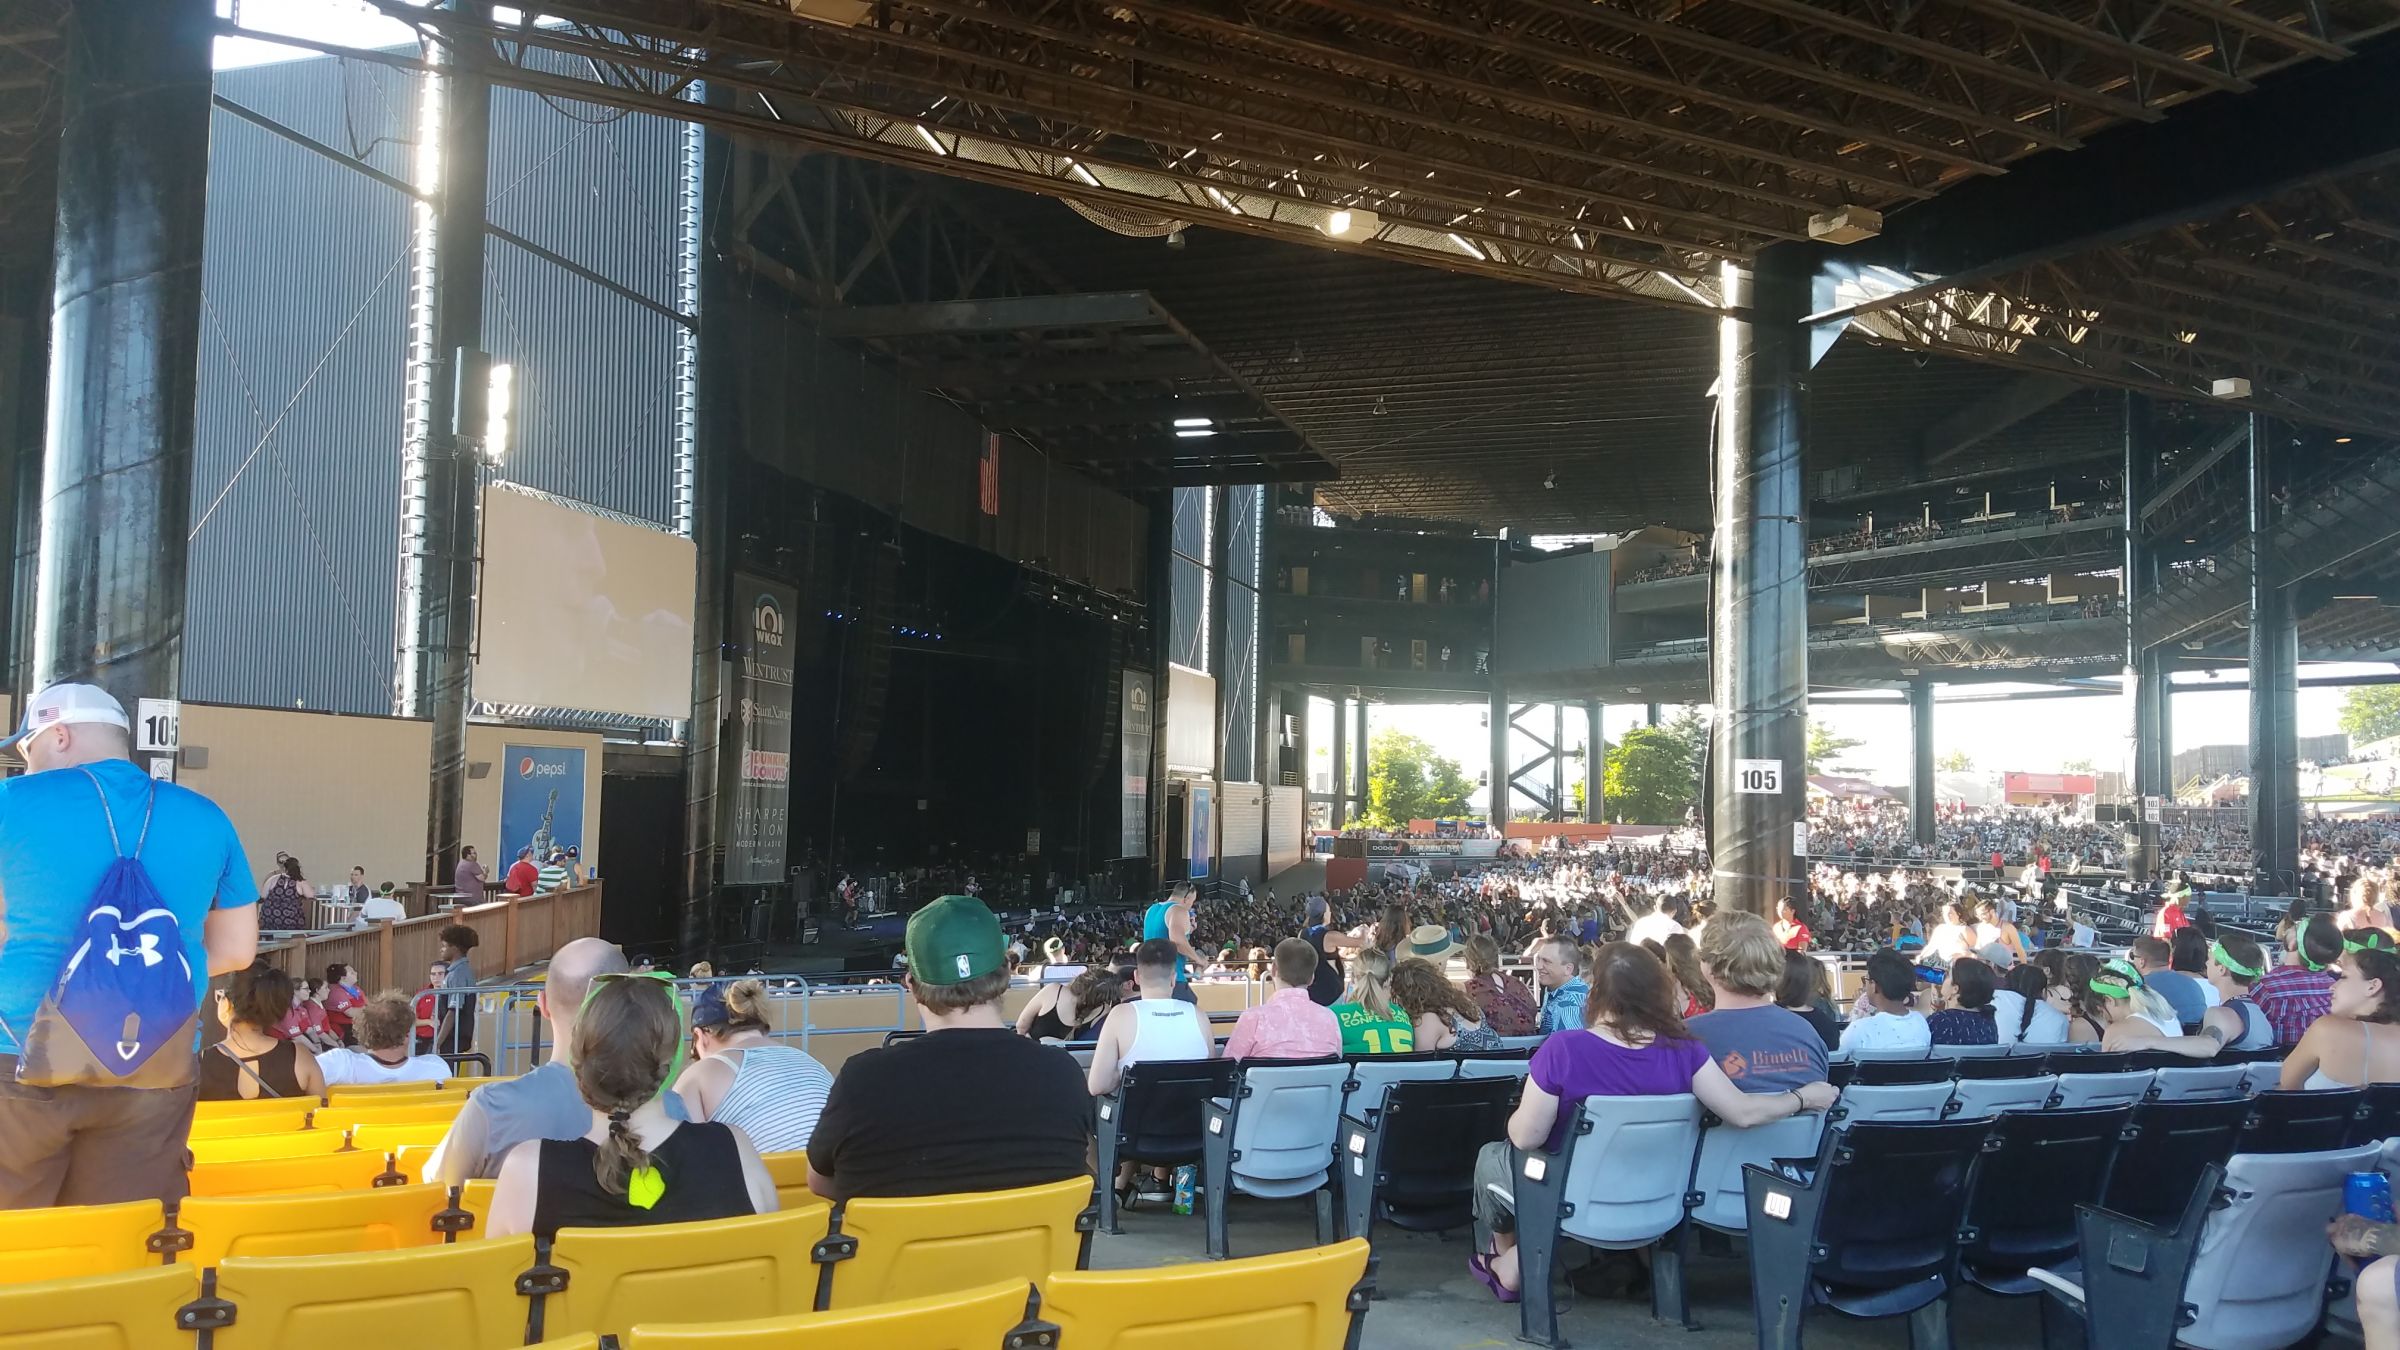 tinley park hollywood casino amphitheatre rules